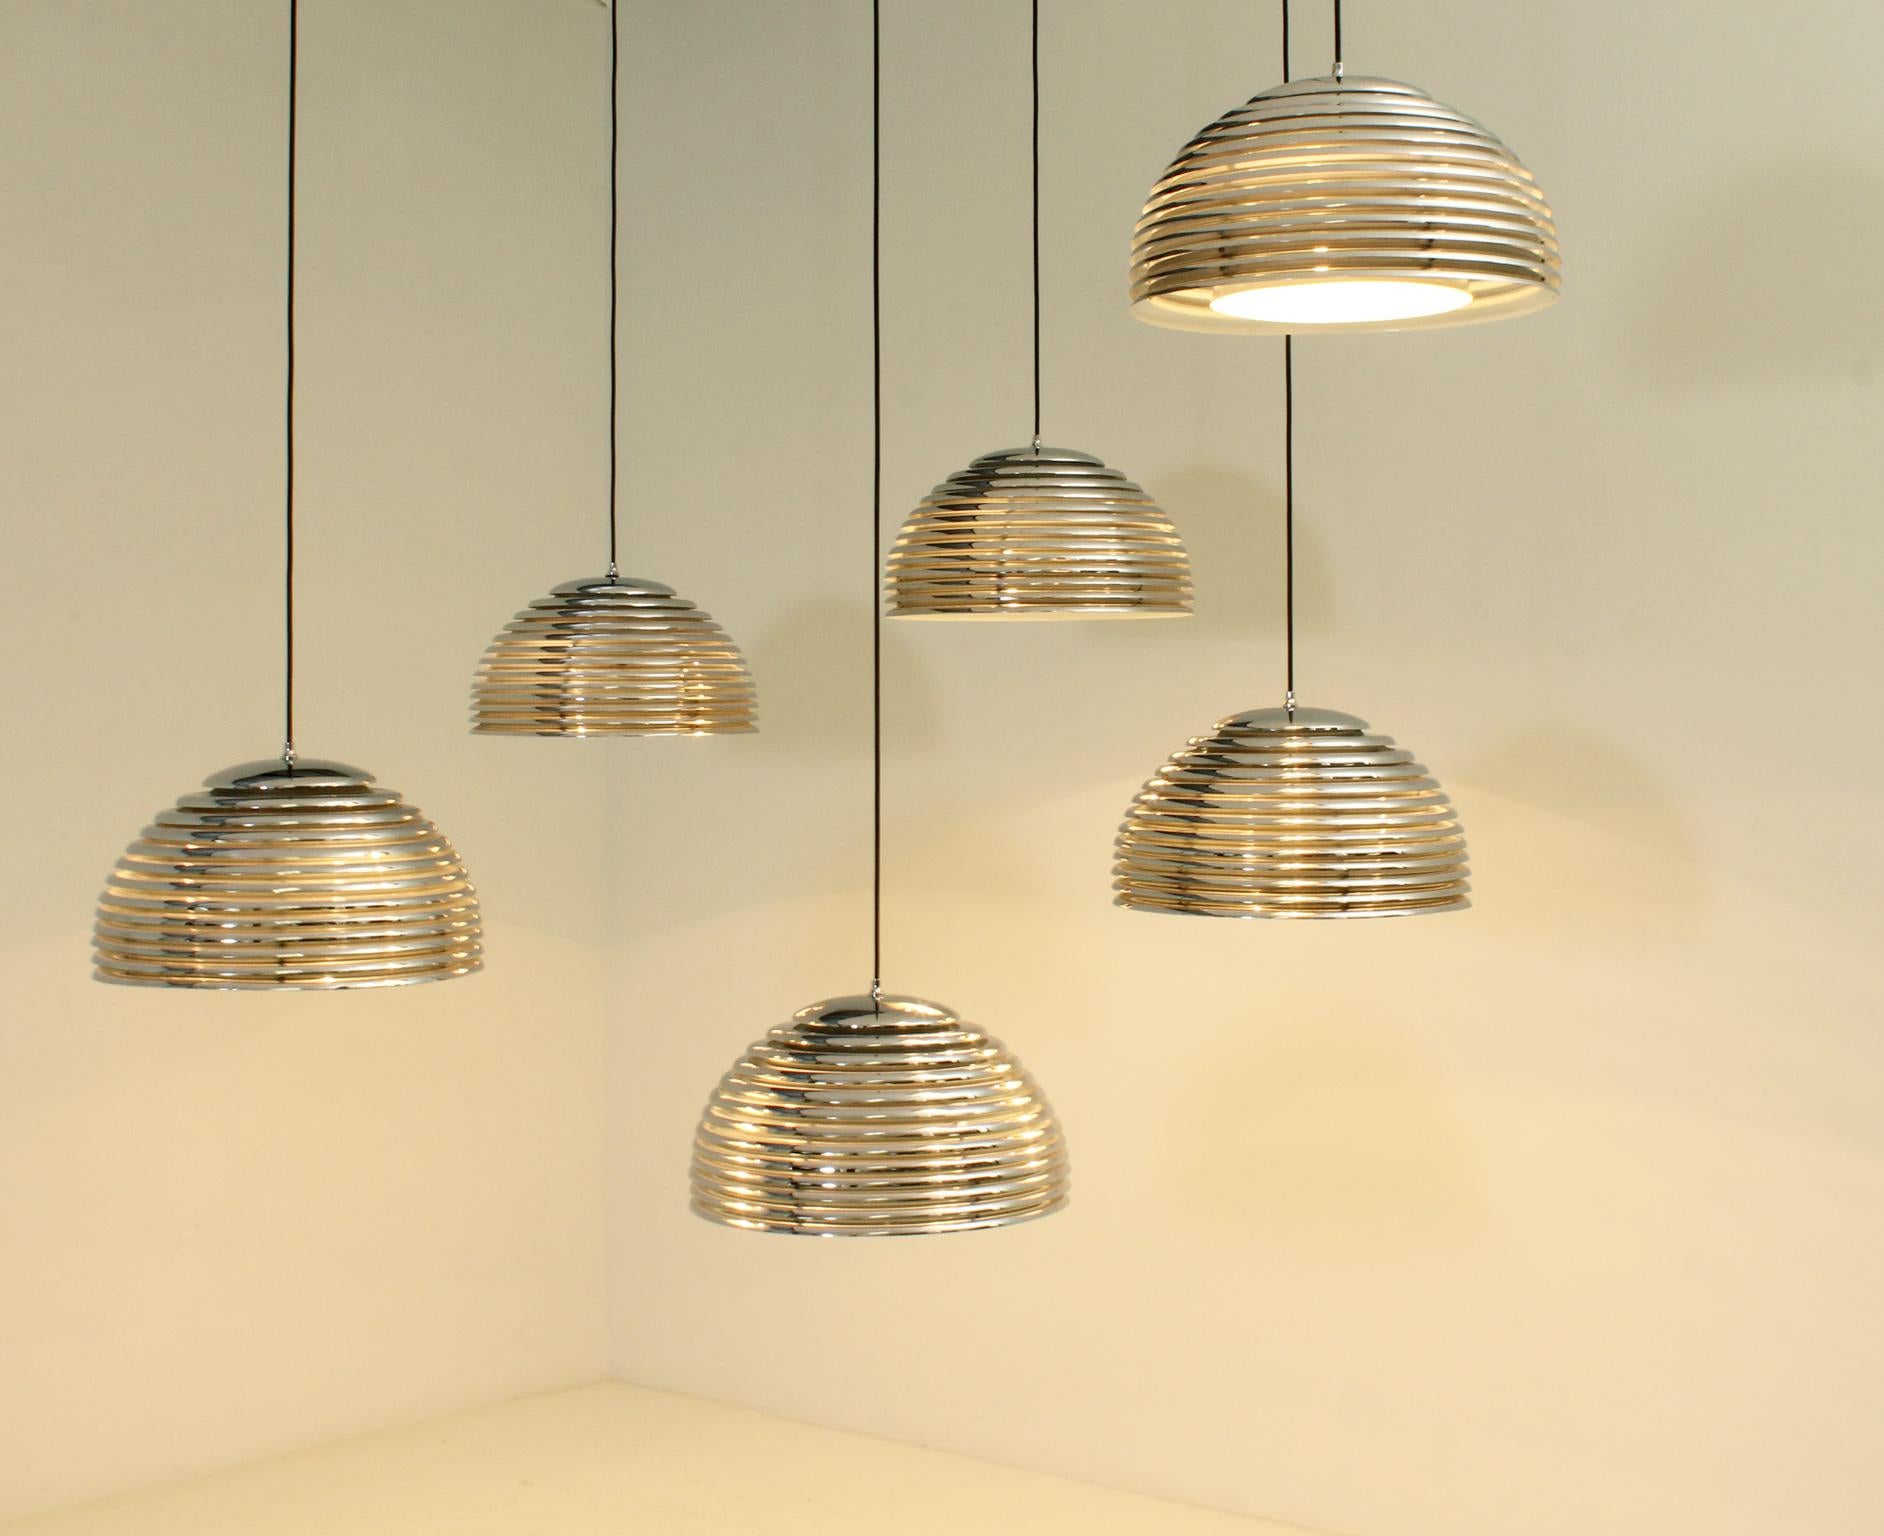 Large Saturno Pendant Lamps by Kazuo Motozawa for Staff, 1972 For Sale 4